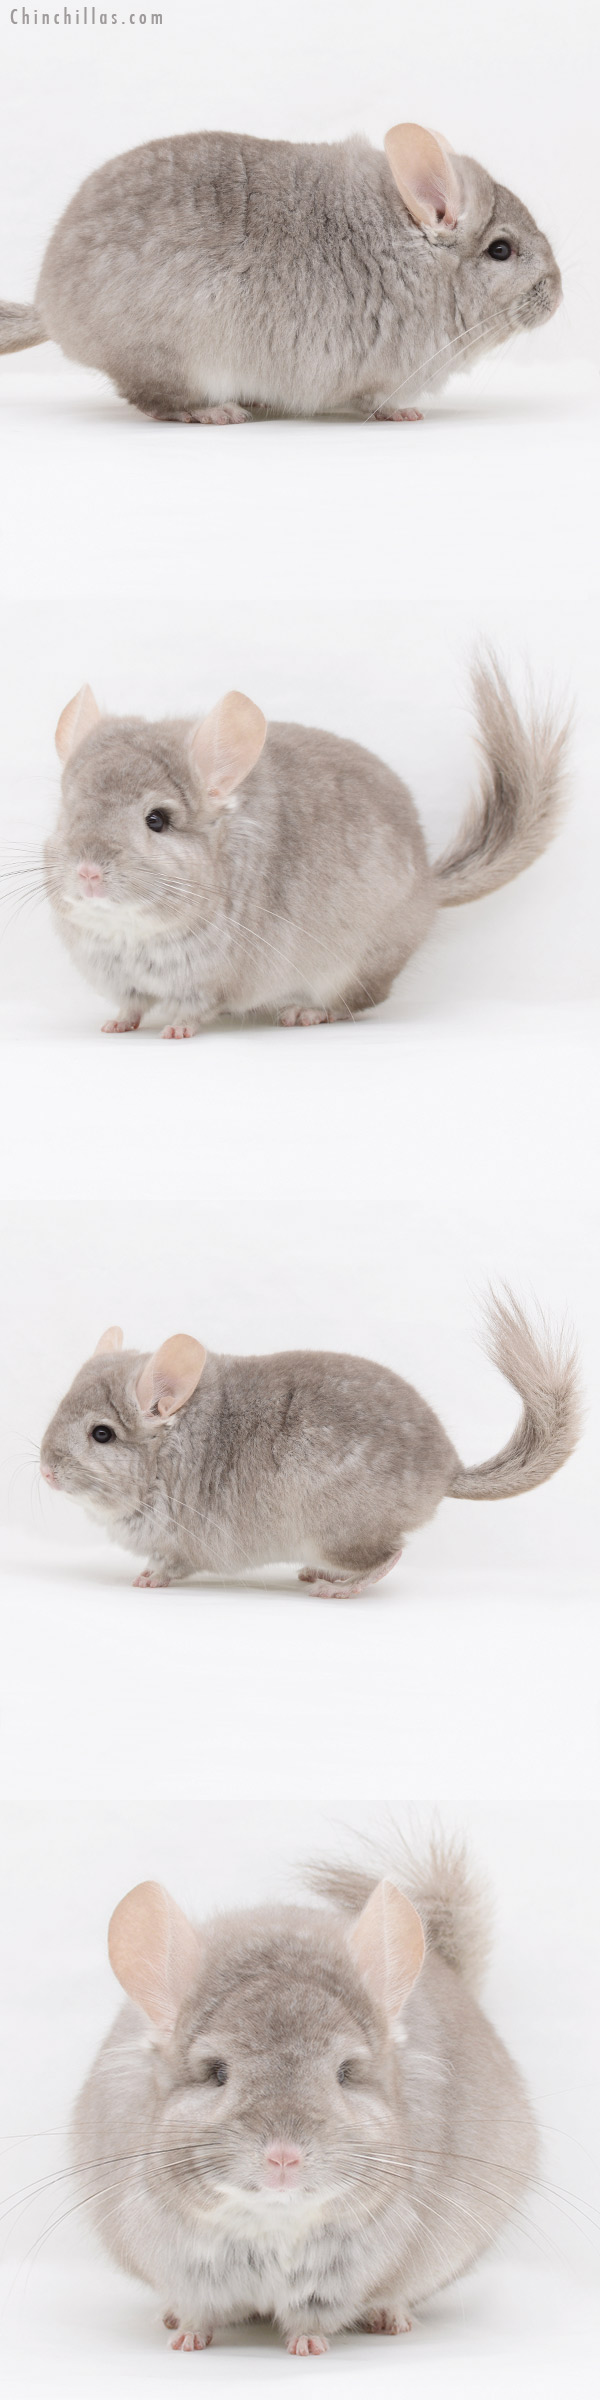 Chinchilla or related item offered for sale or export on Chinchillas.com - 20252 Blocky Beige  Royal Persian Angora Male Chinchilla